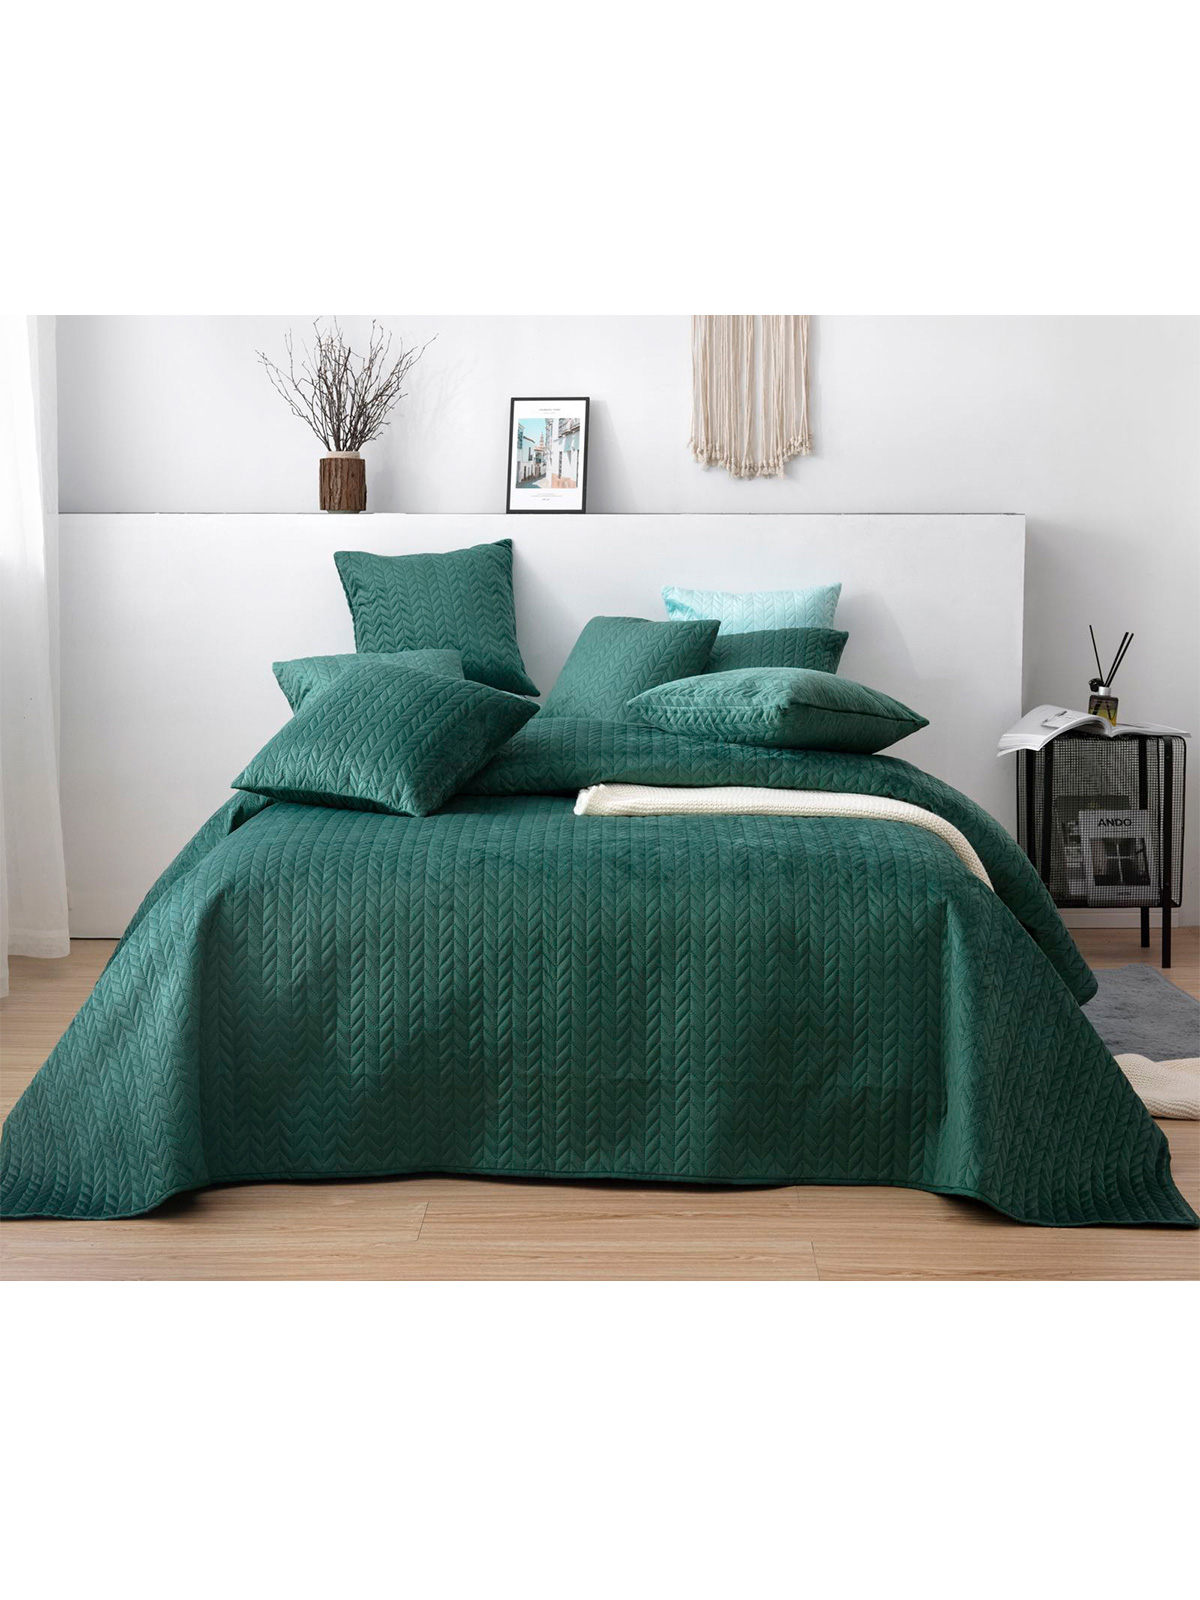 Edoti Quilted Bedspread Moxie